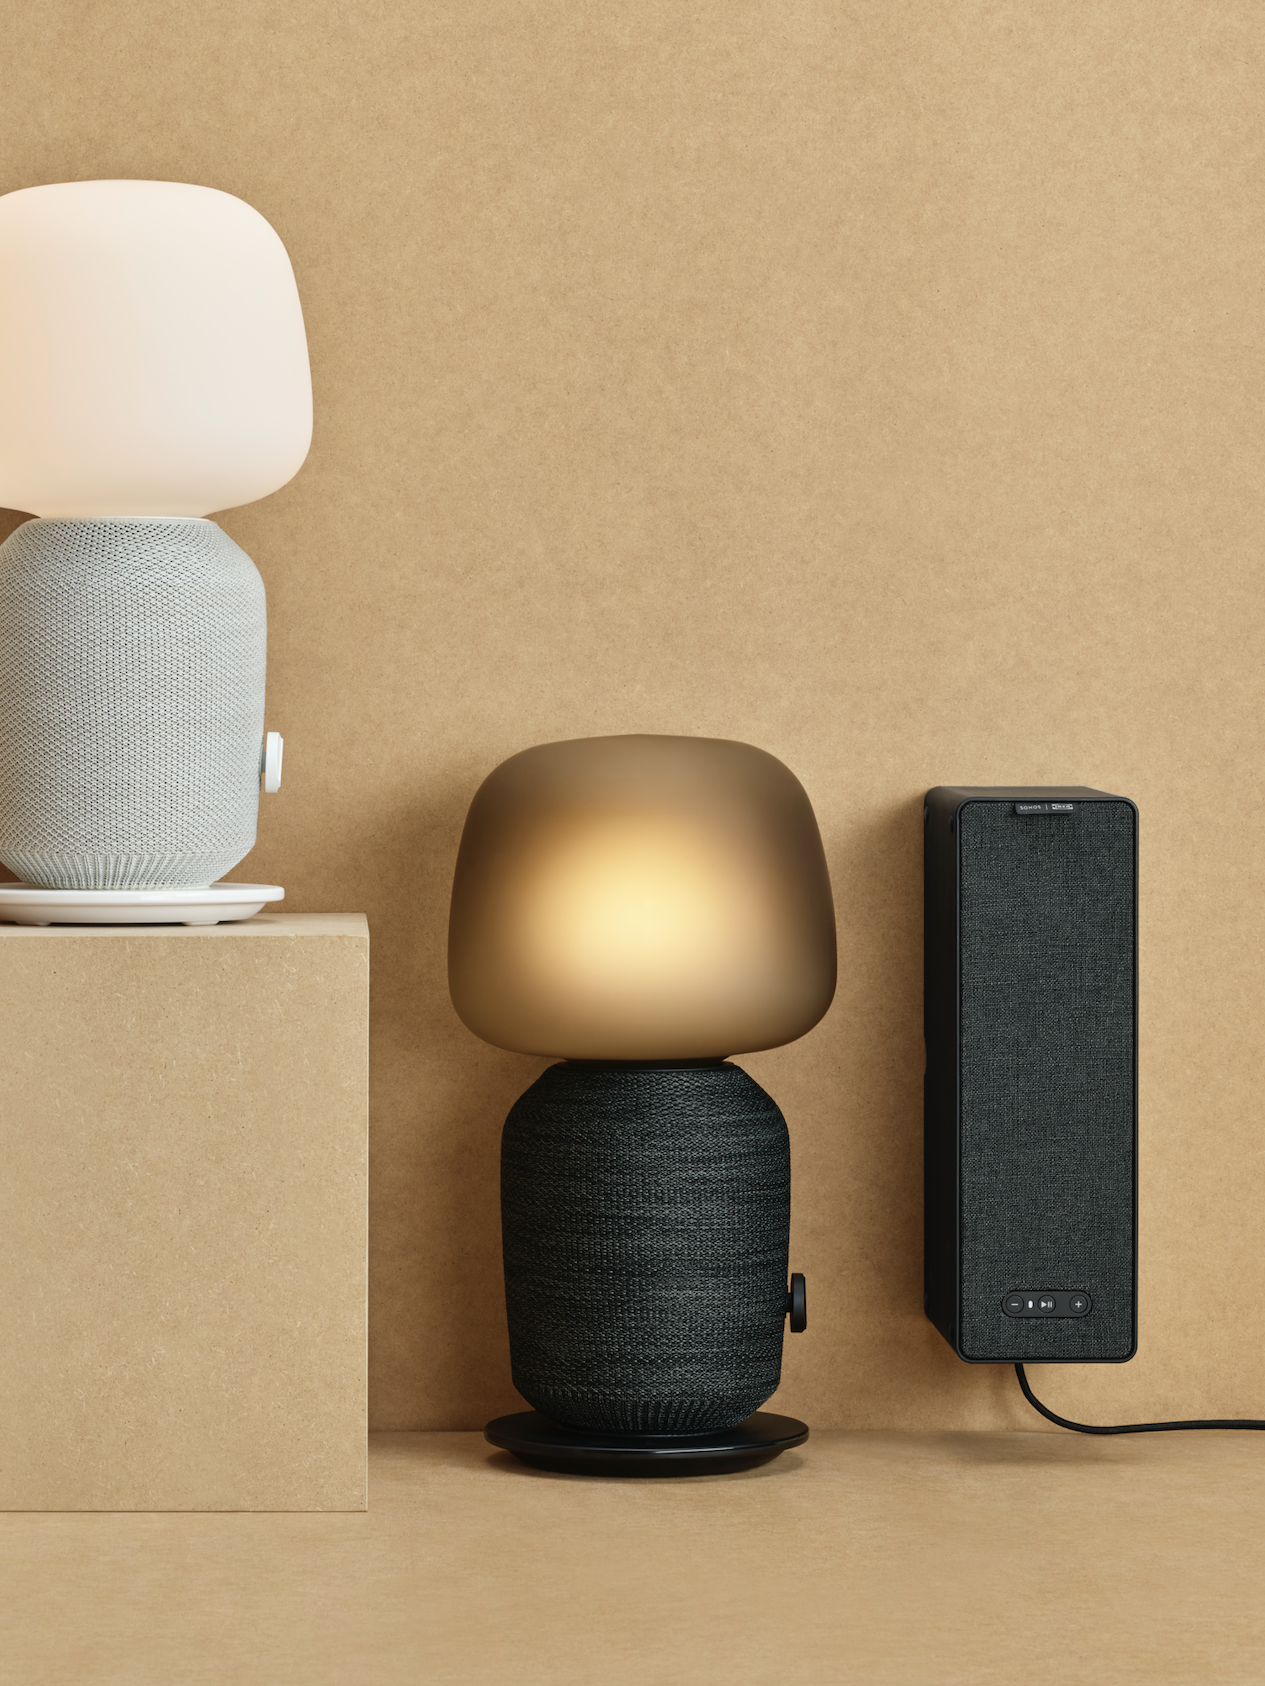 We’re Geeking Out Over This IKEA x Sonos Speaker That Doubles as a Lamp